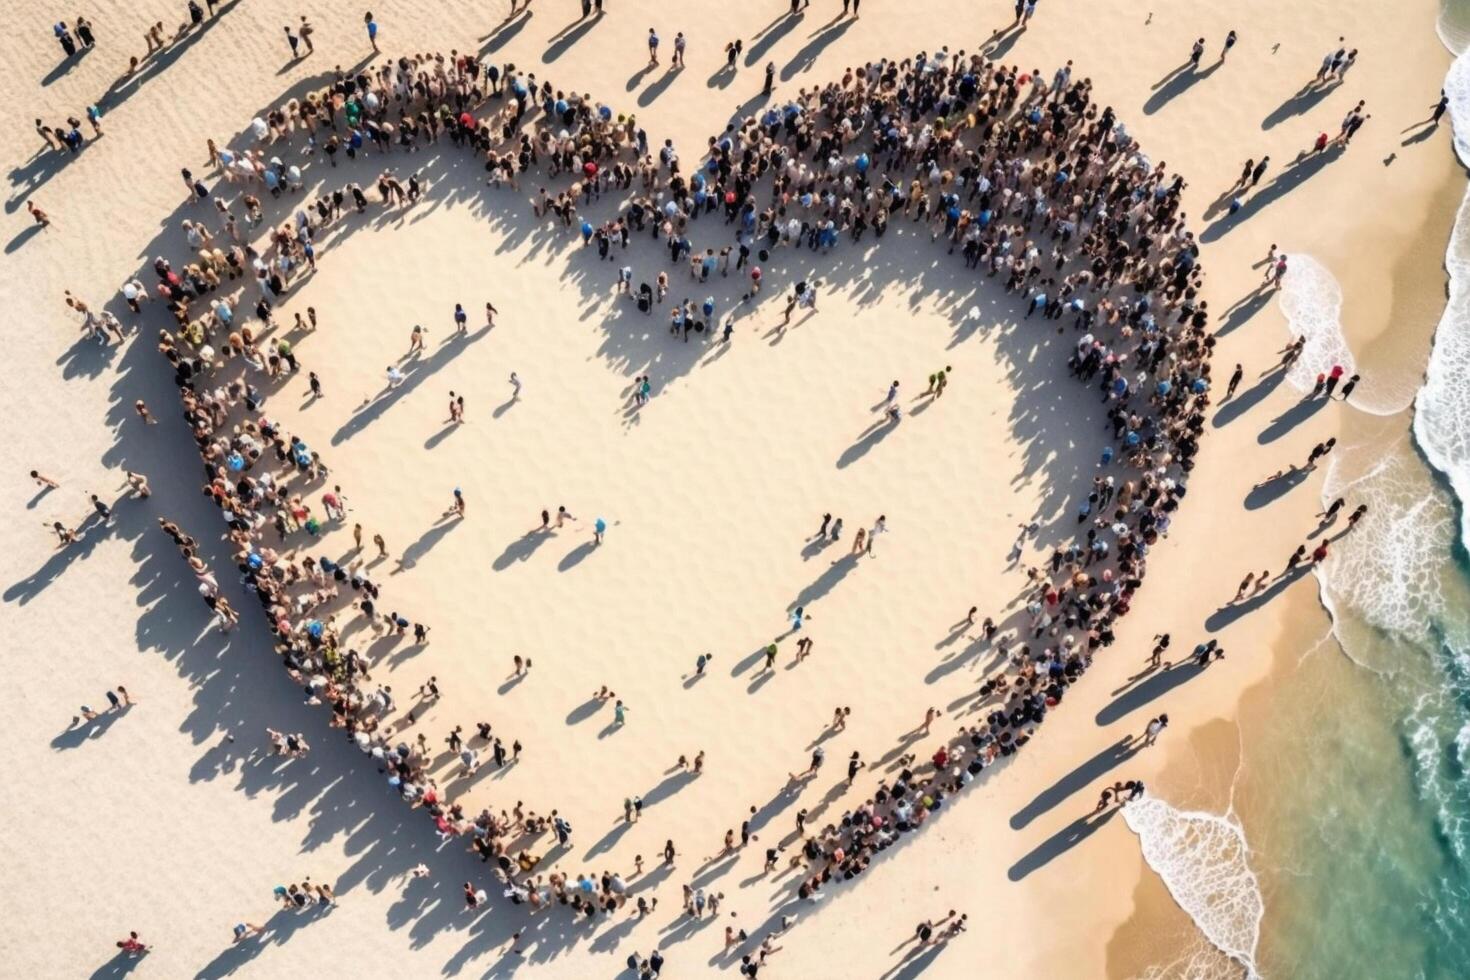 A large group of people standing in the shape of a heart, photo